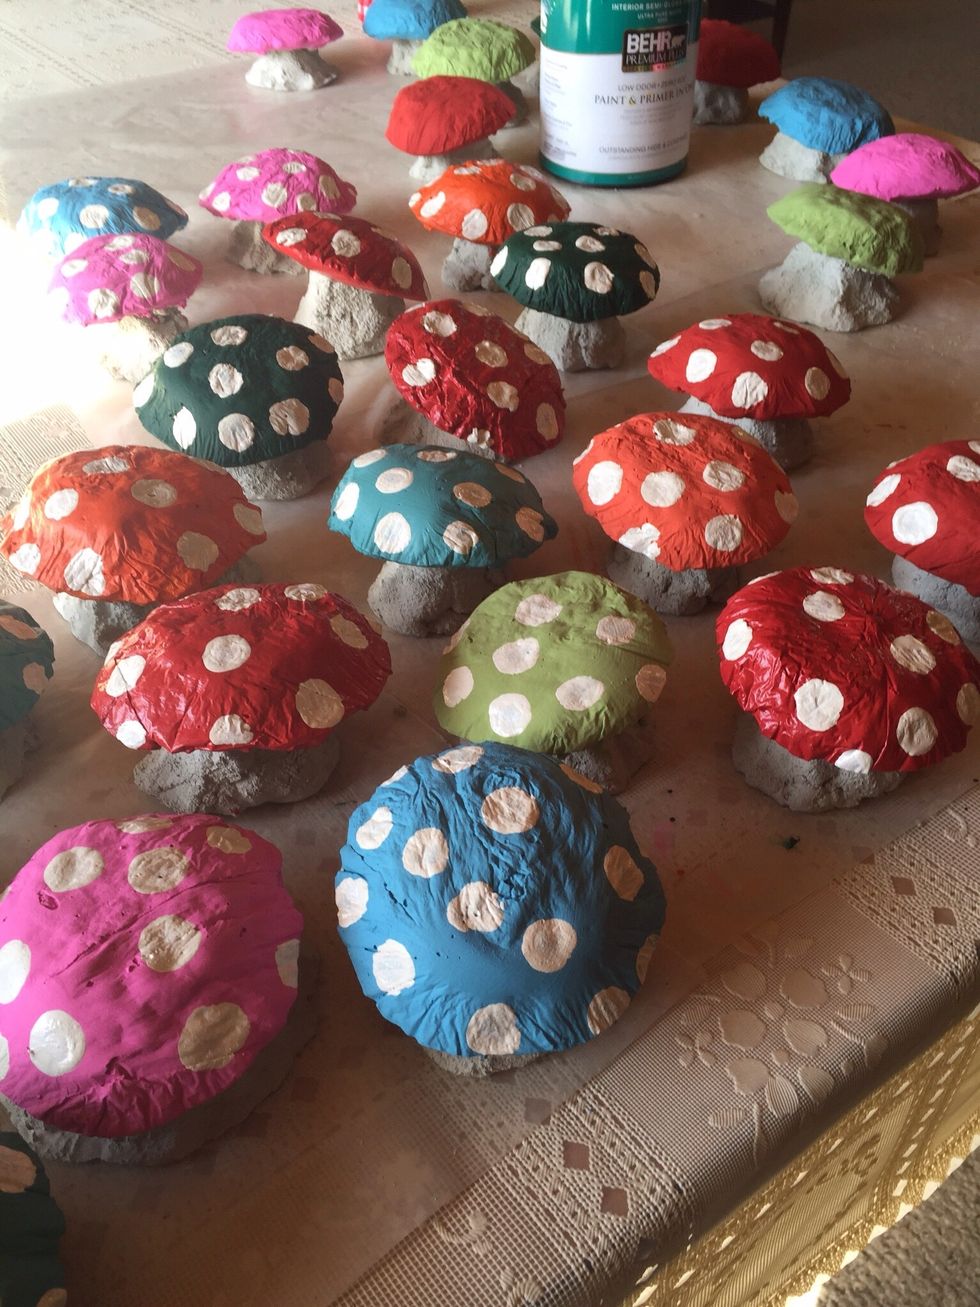 How to make concrete mushrooms for the garden - B+C Guides